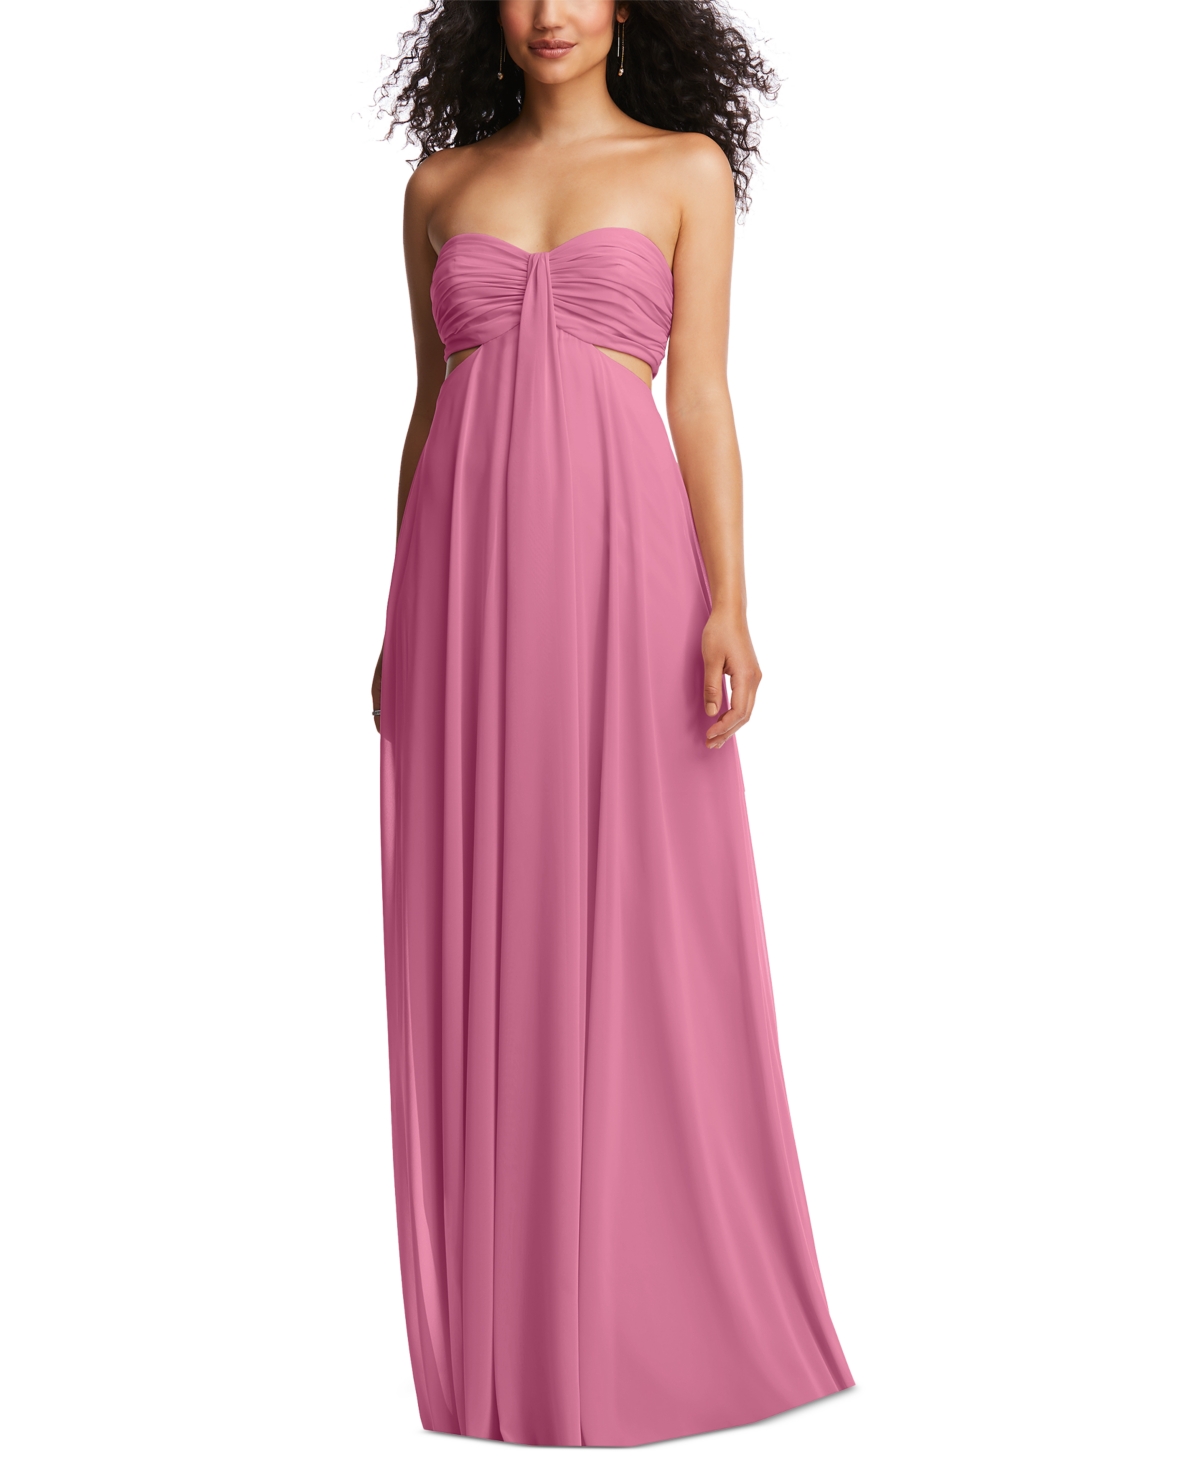 Dessy Collection Women's Strapless Waist-Cutout Gown